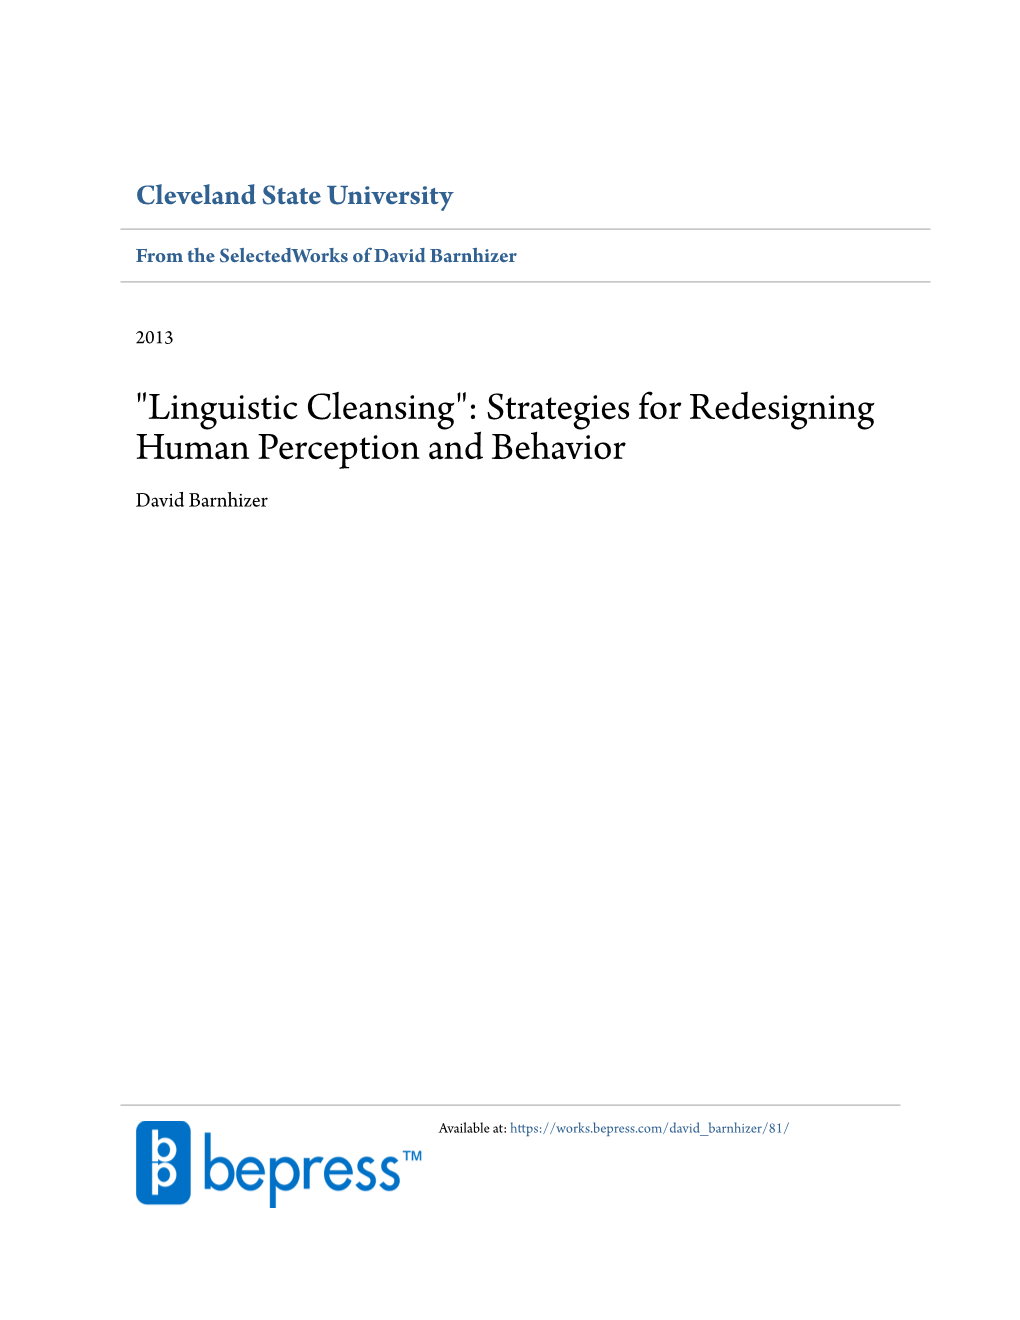 "Linguistic Cleansing": Strategies for Redesigning Human Perception and Behavior David Barnhizer